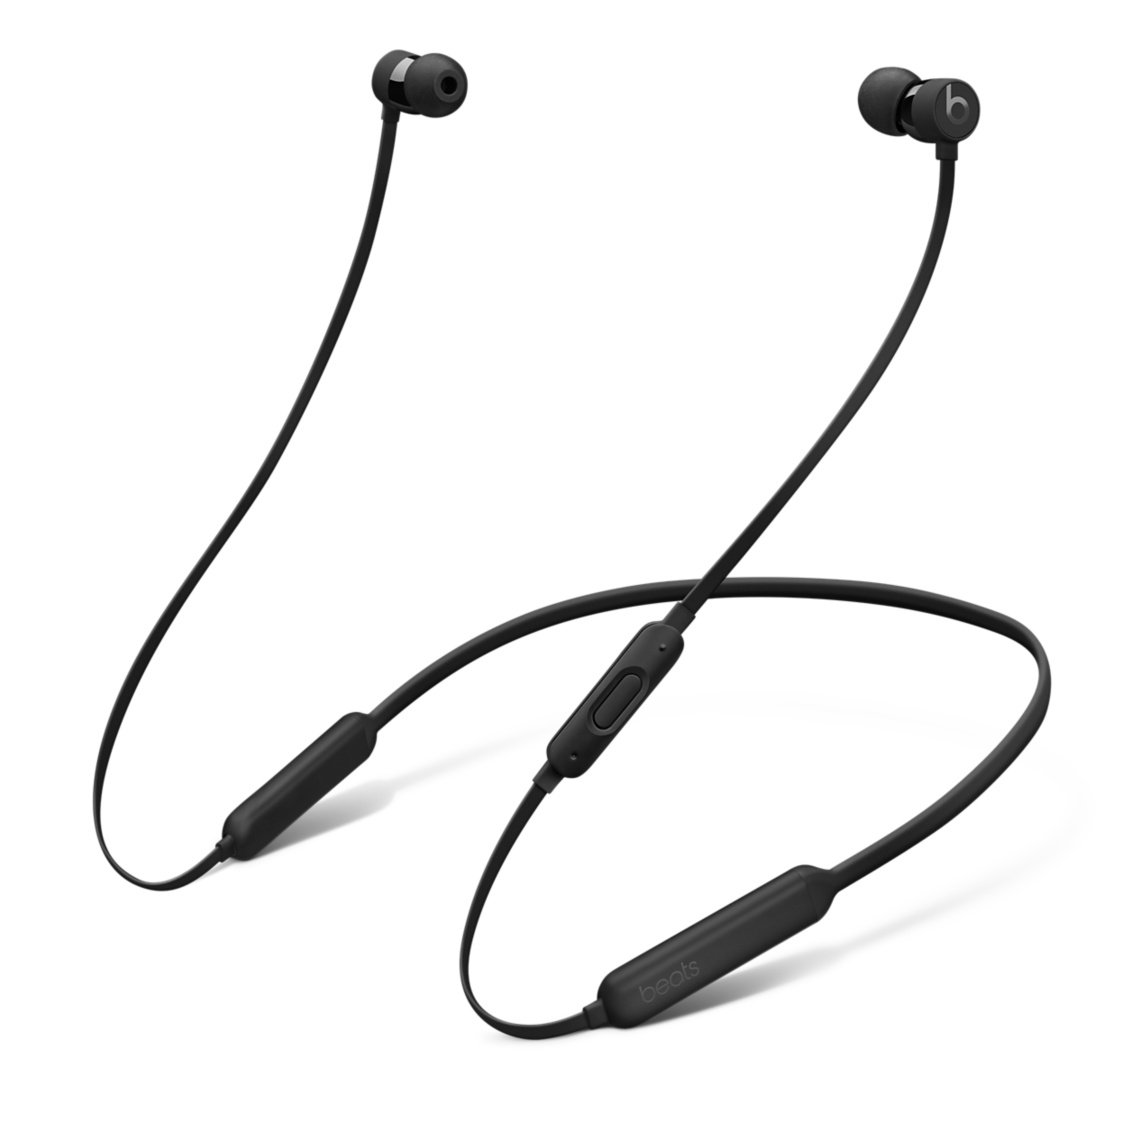 Do BeatsX Headphones work with Android 